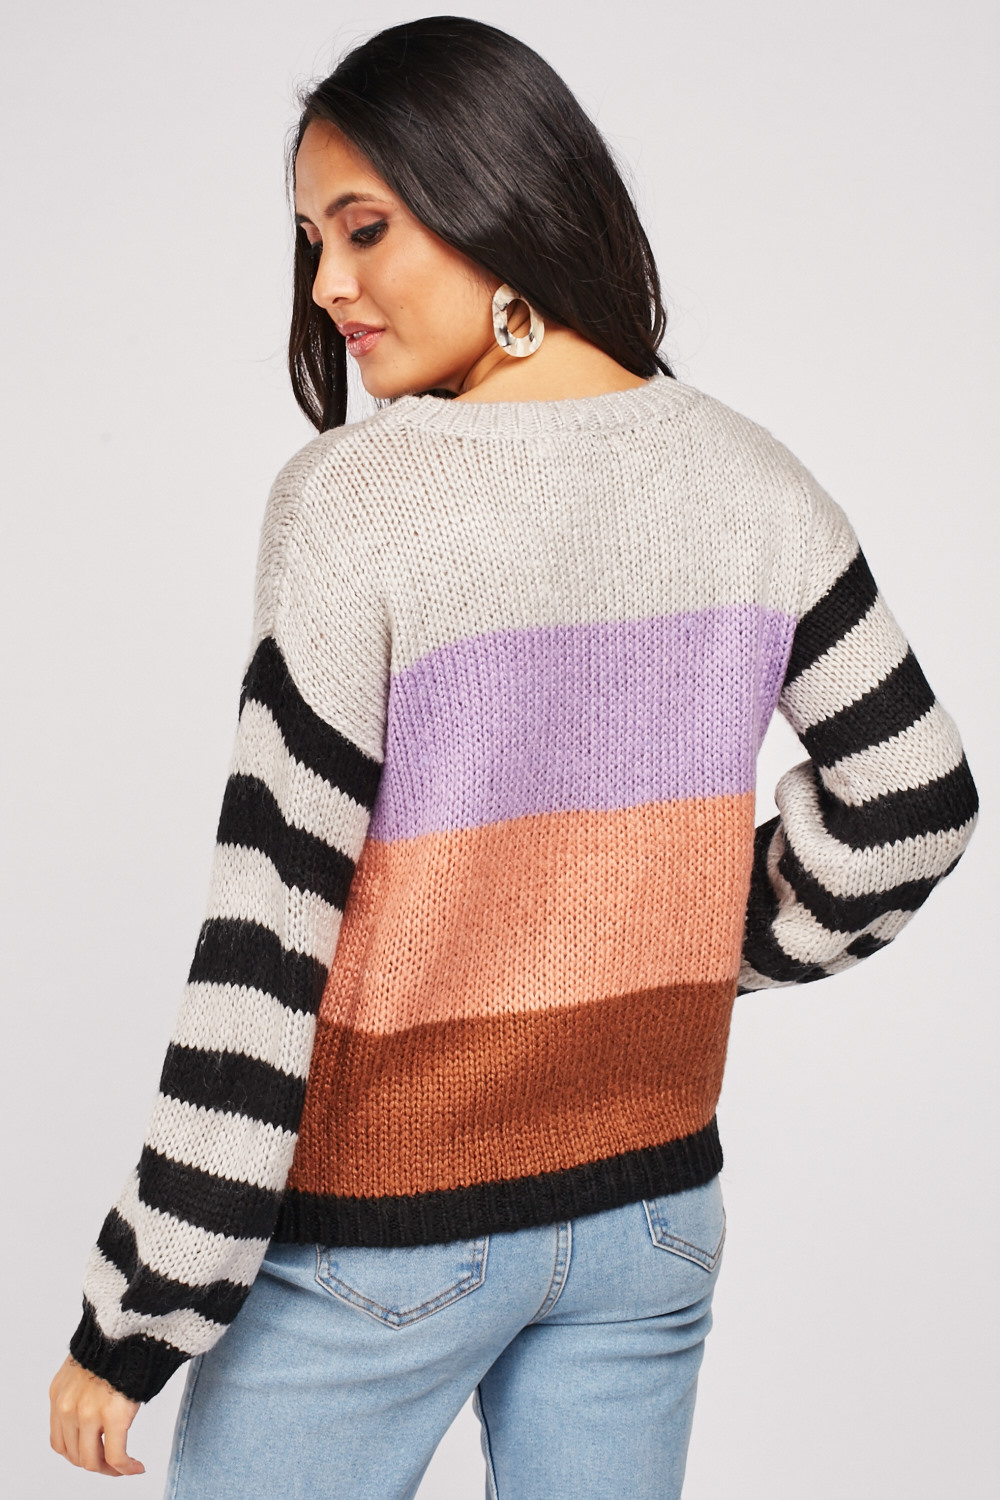 Colour Block Striped Knitted Jumper - Just $7